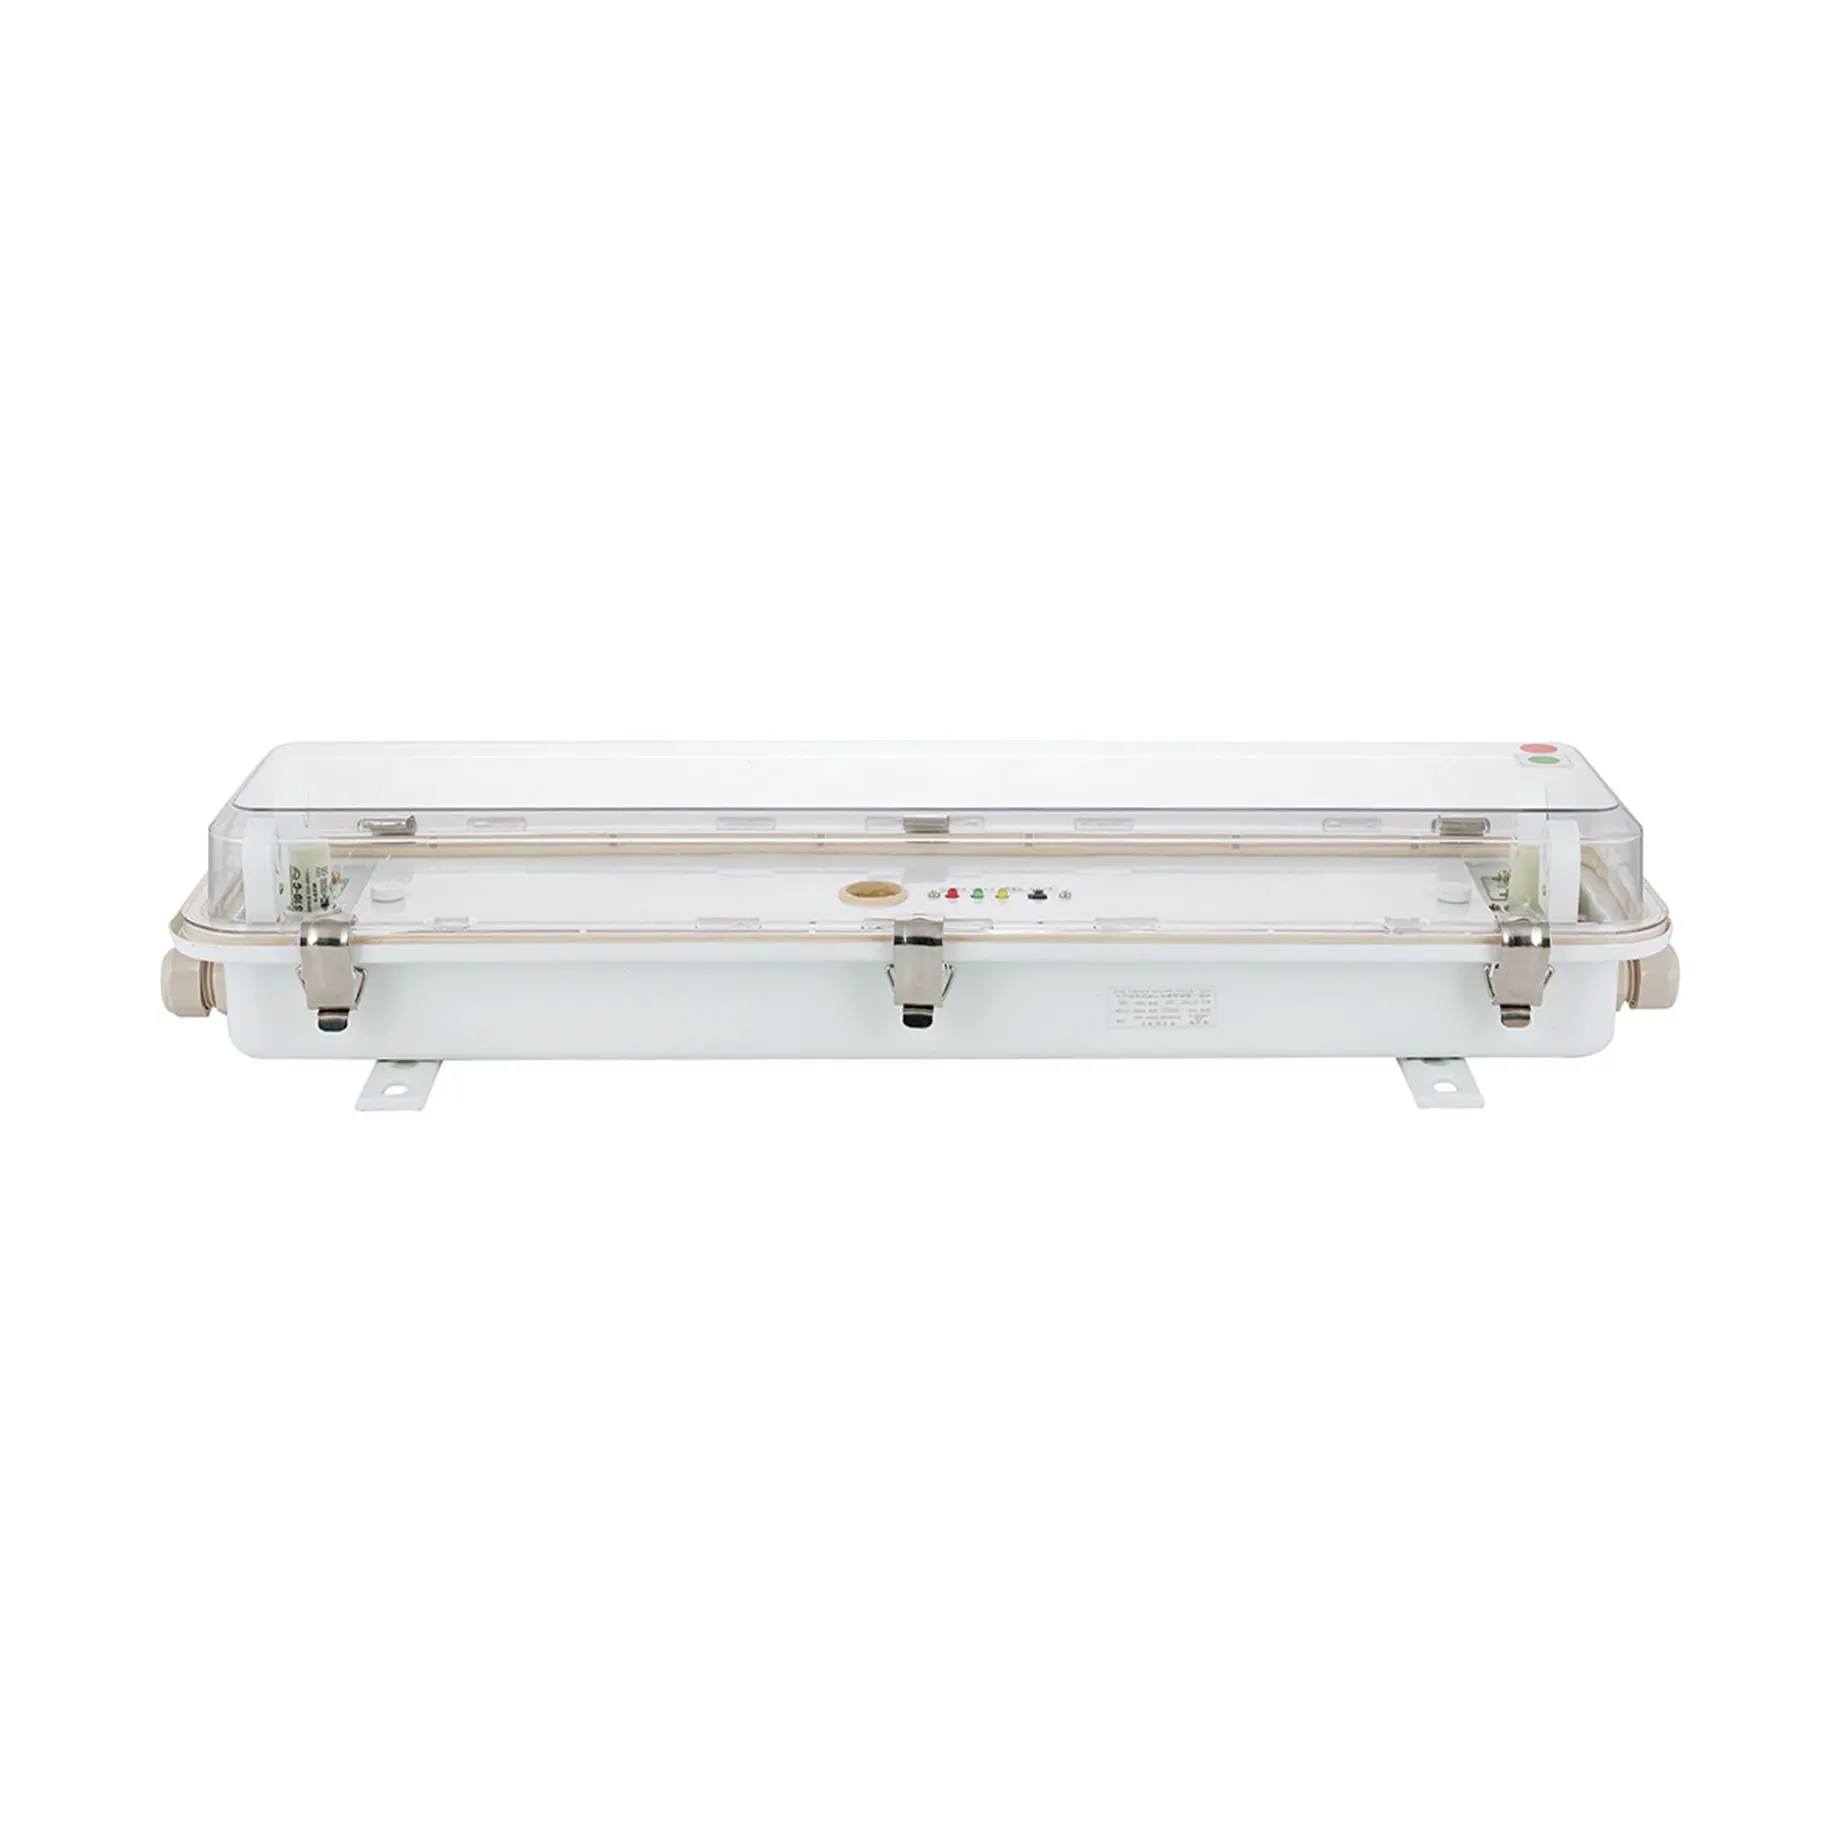 JCY401-2 2x40W Fluorescent Pendant Light with 3-Hour Battery Backup Emergency Lamp for Ship Industry